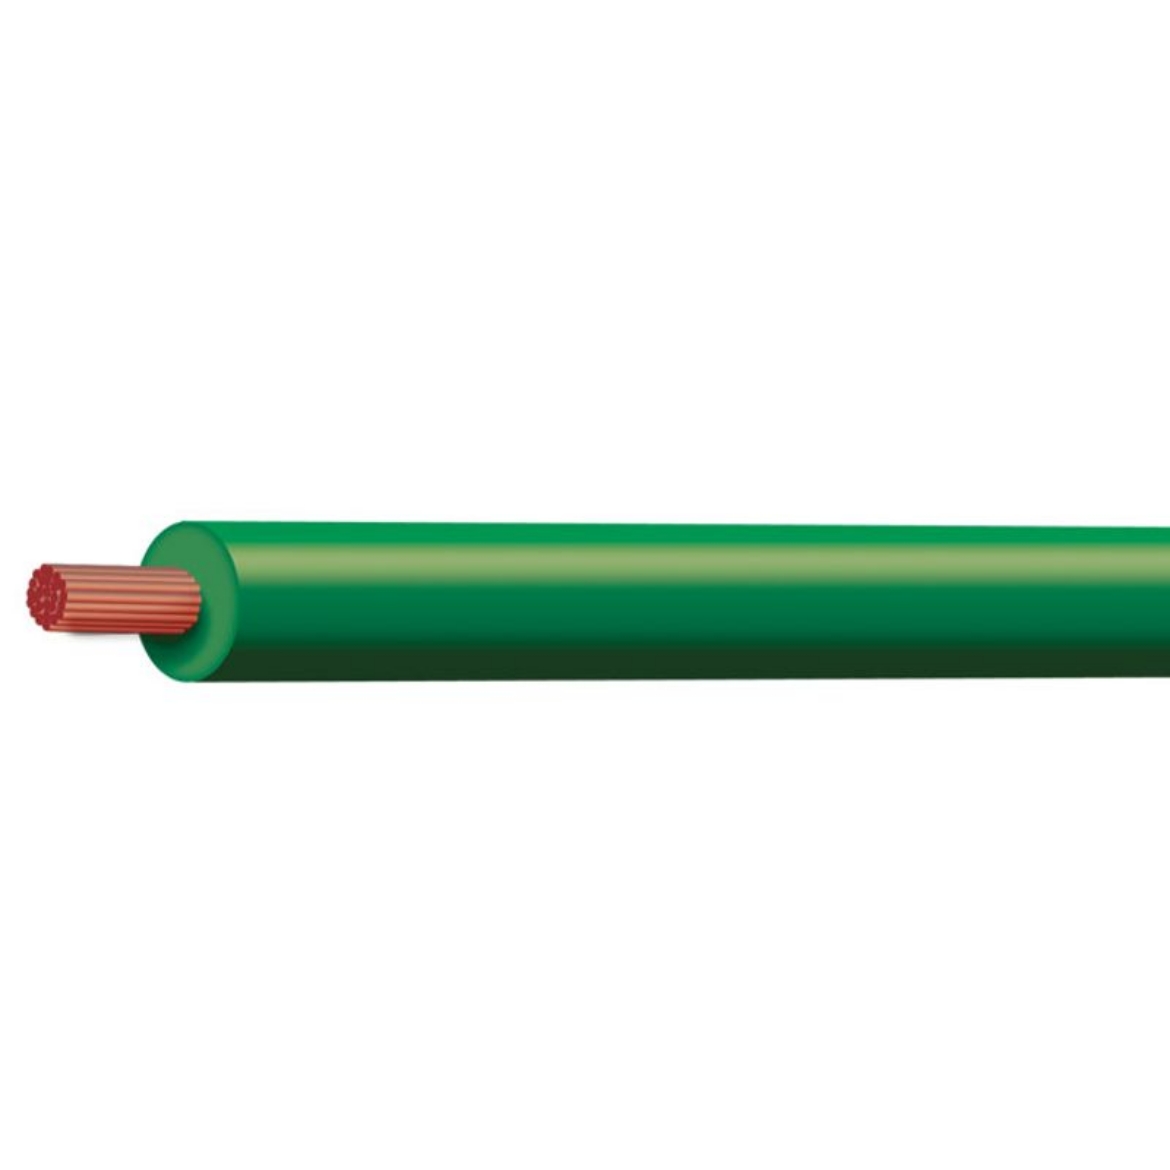 Picture of TYCAB 6MM SINGLE CORE CABLE 50A GREEN - 30M ROLL